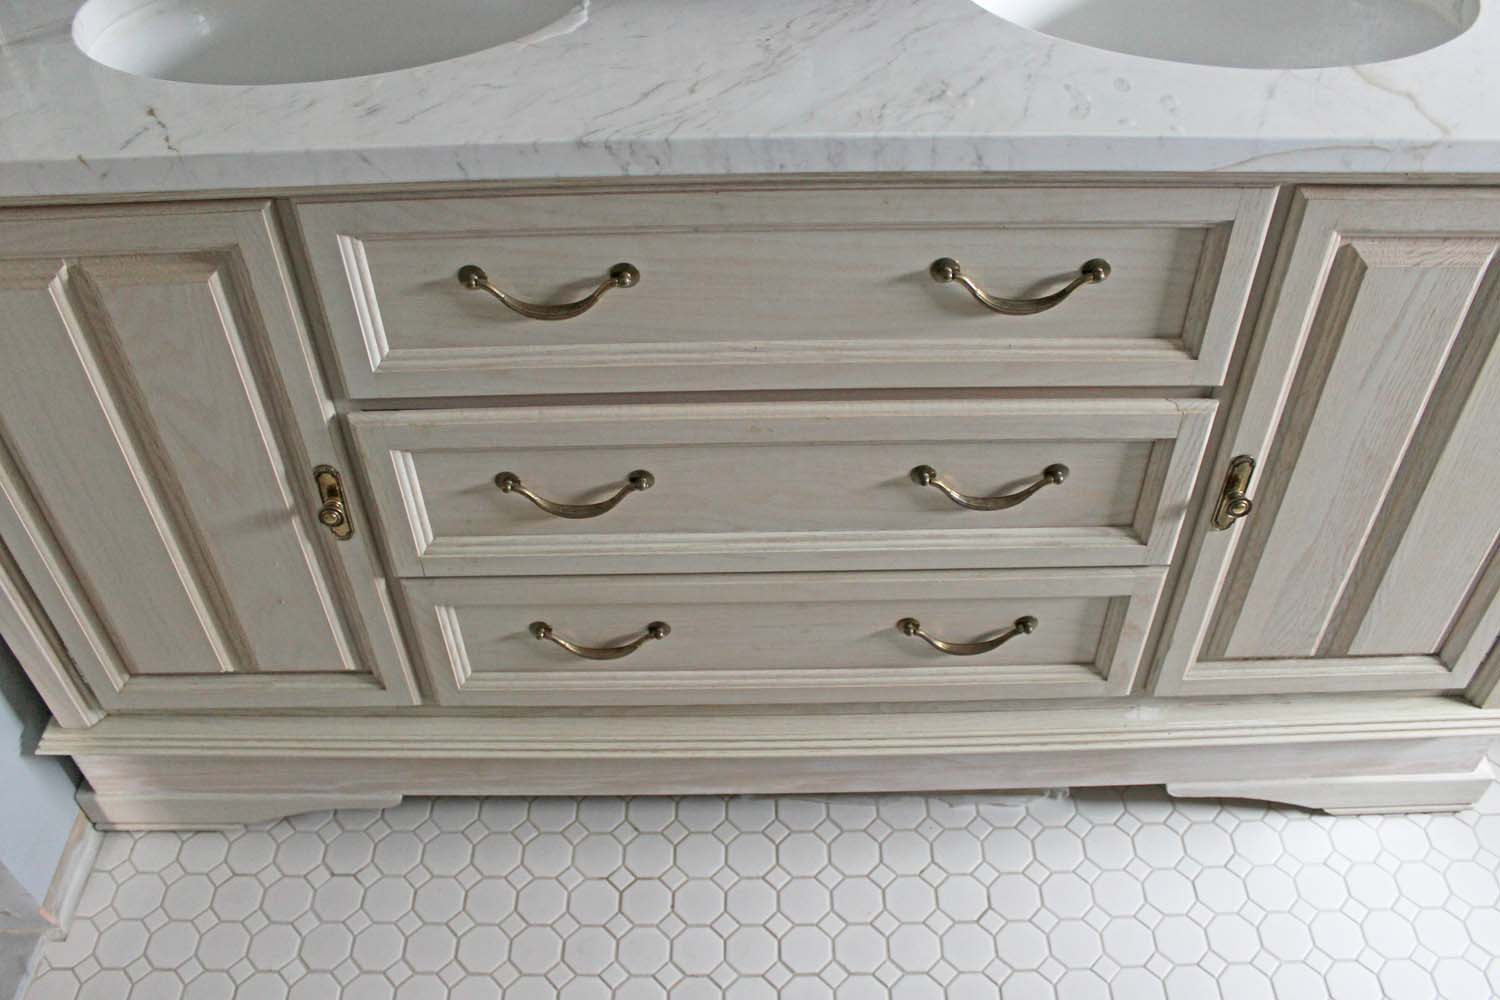 Our DIY Bathroom Vanity Made From a Buffet Cabinet